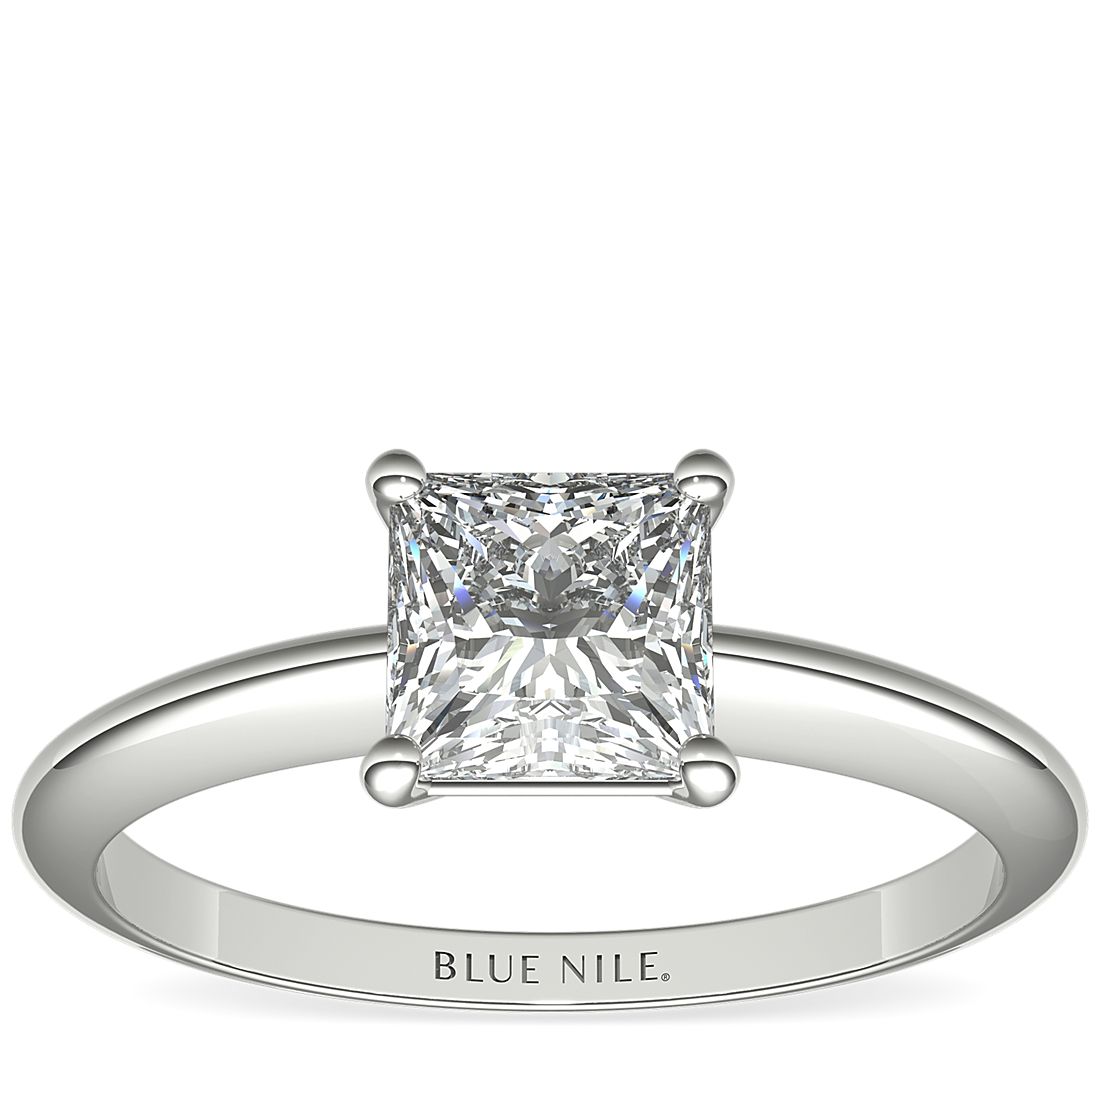 Blue Nile Classic Four Claw Solitaire 0.30-Carat Cushion-Cut Diamond Ring in 14k White Gold